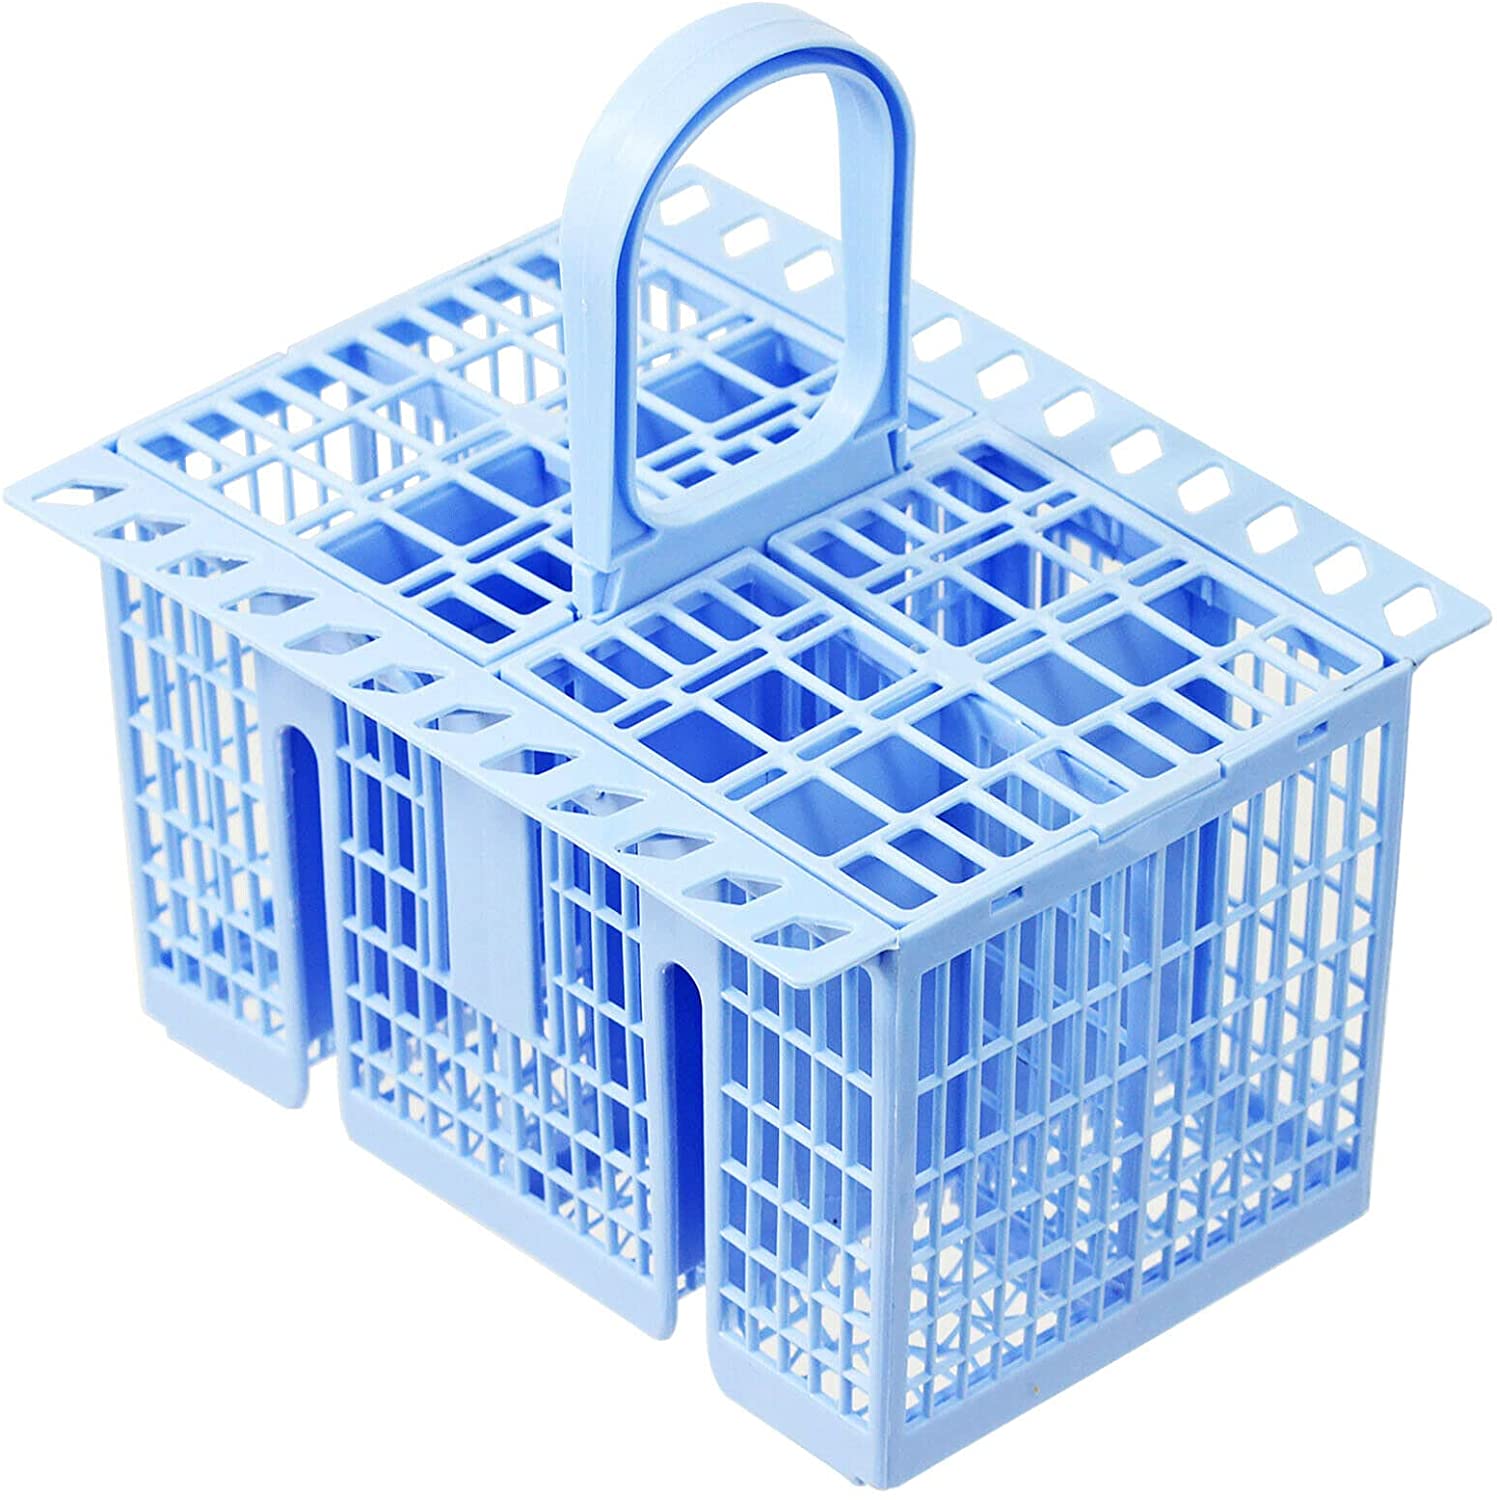 SPARES2GO Cutlery Basket compatible with SMEG Dishwasher (Blue, 220 x 208 x 160mm)